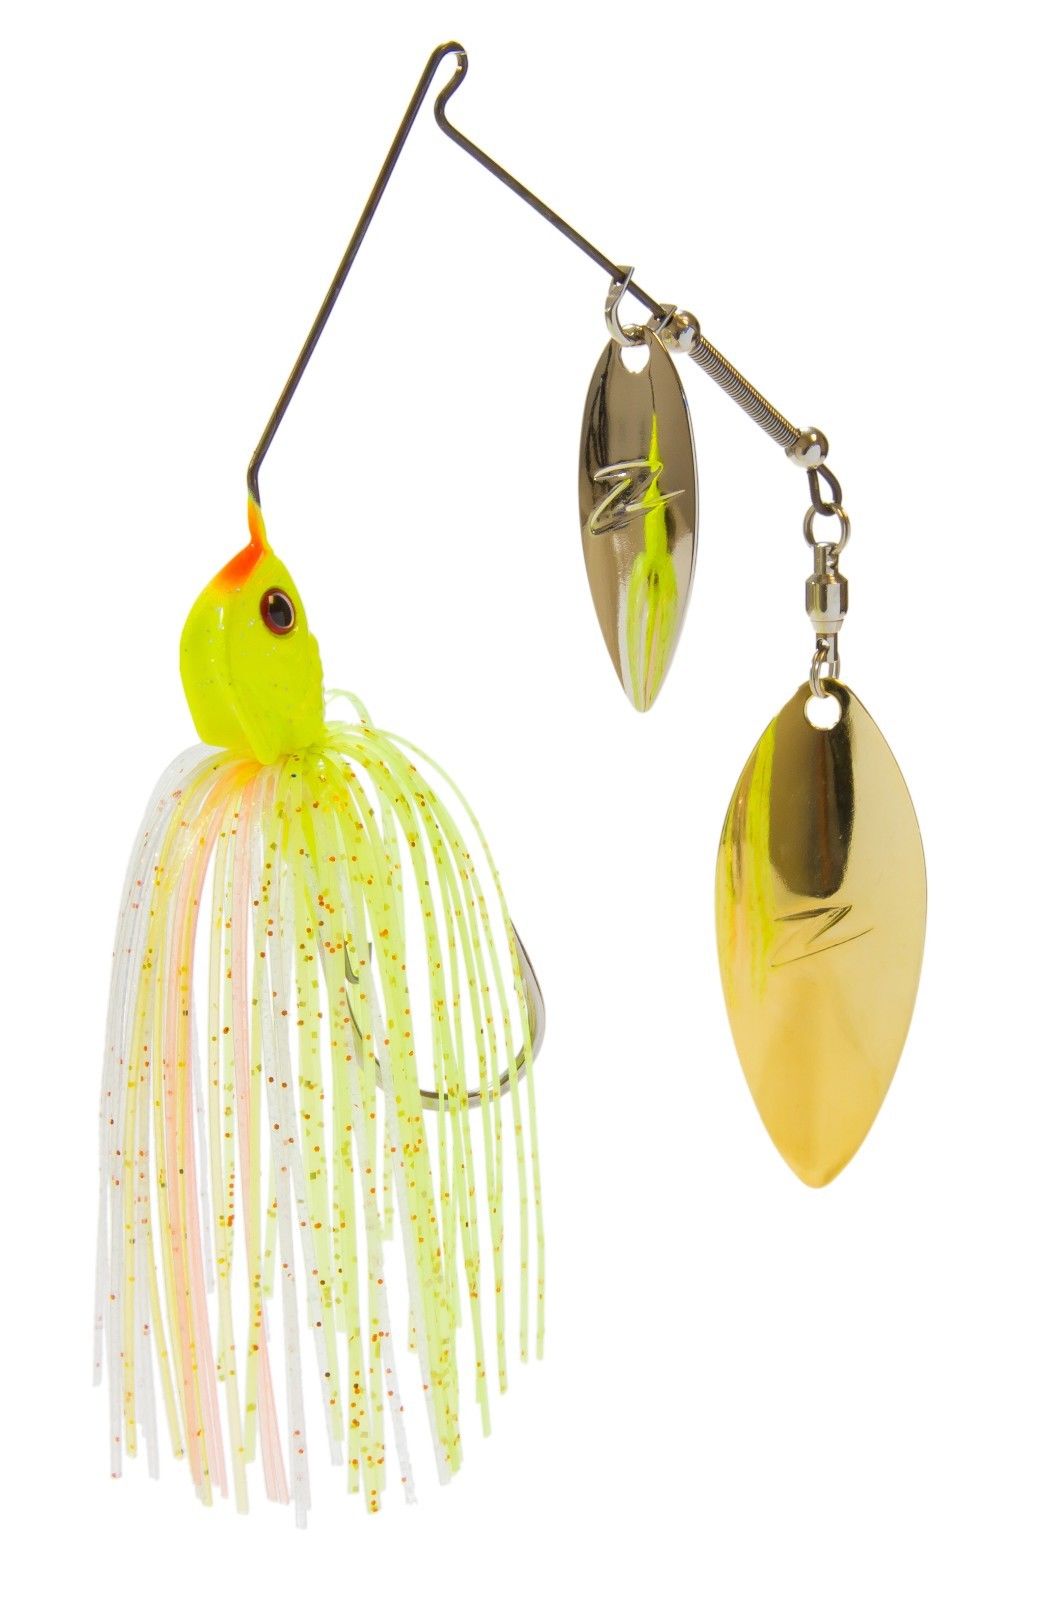 Z-Man Slingbladez Double Willow Spinnerbait - 3/8oz - Red Perch